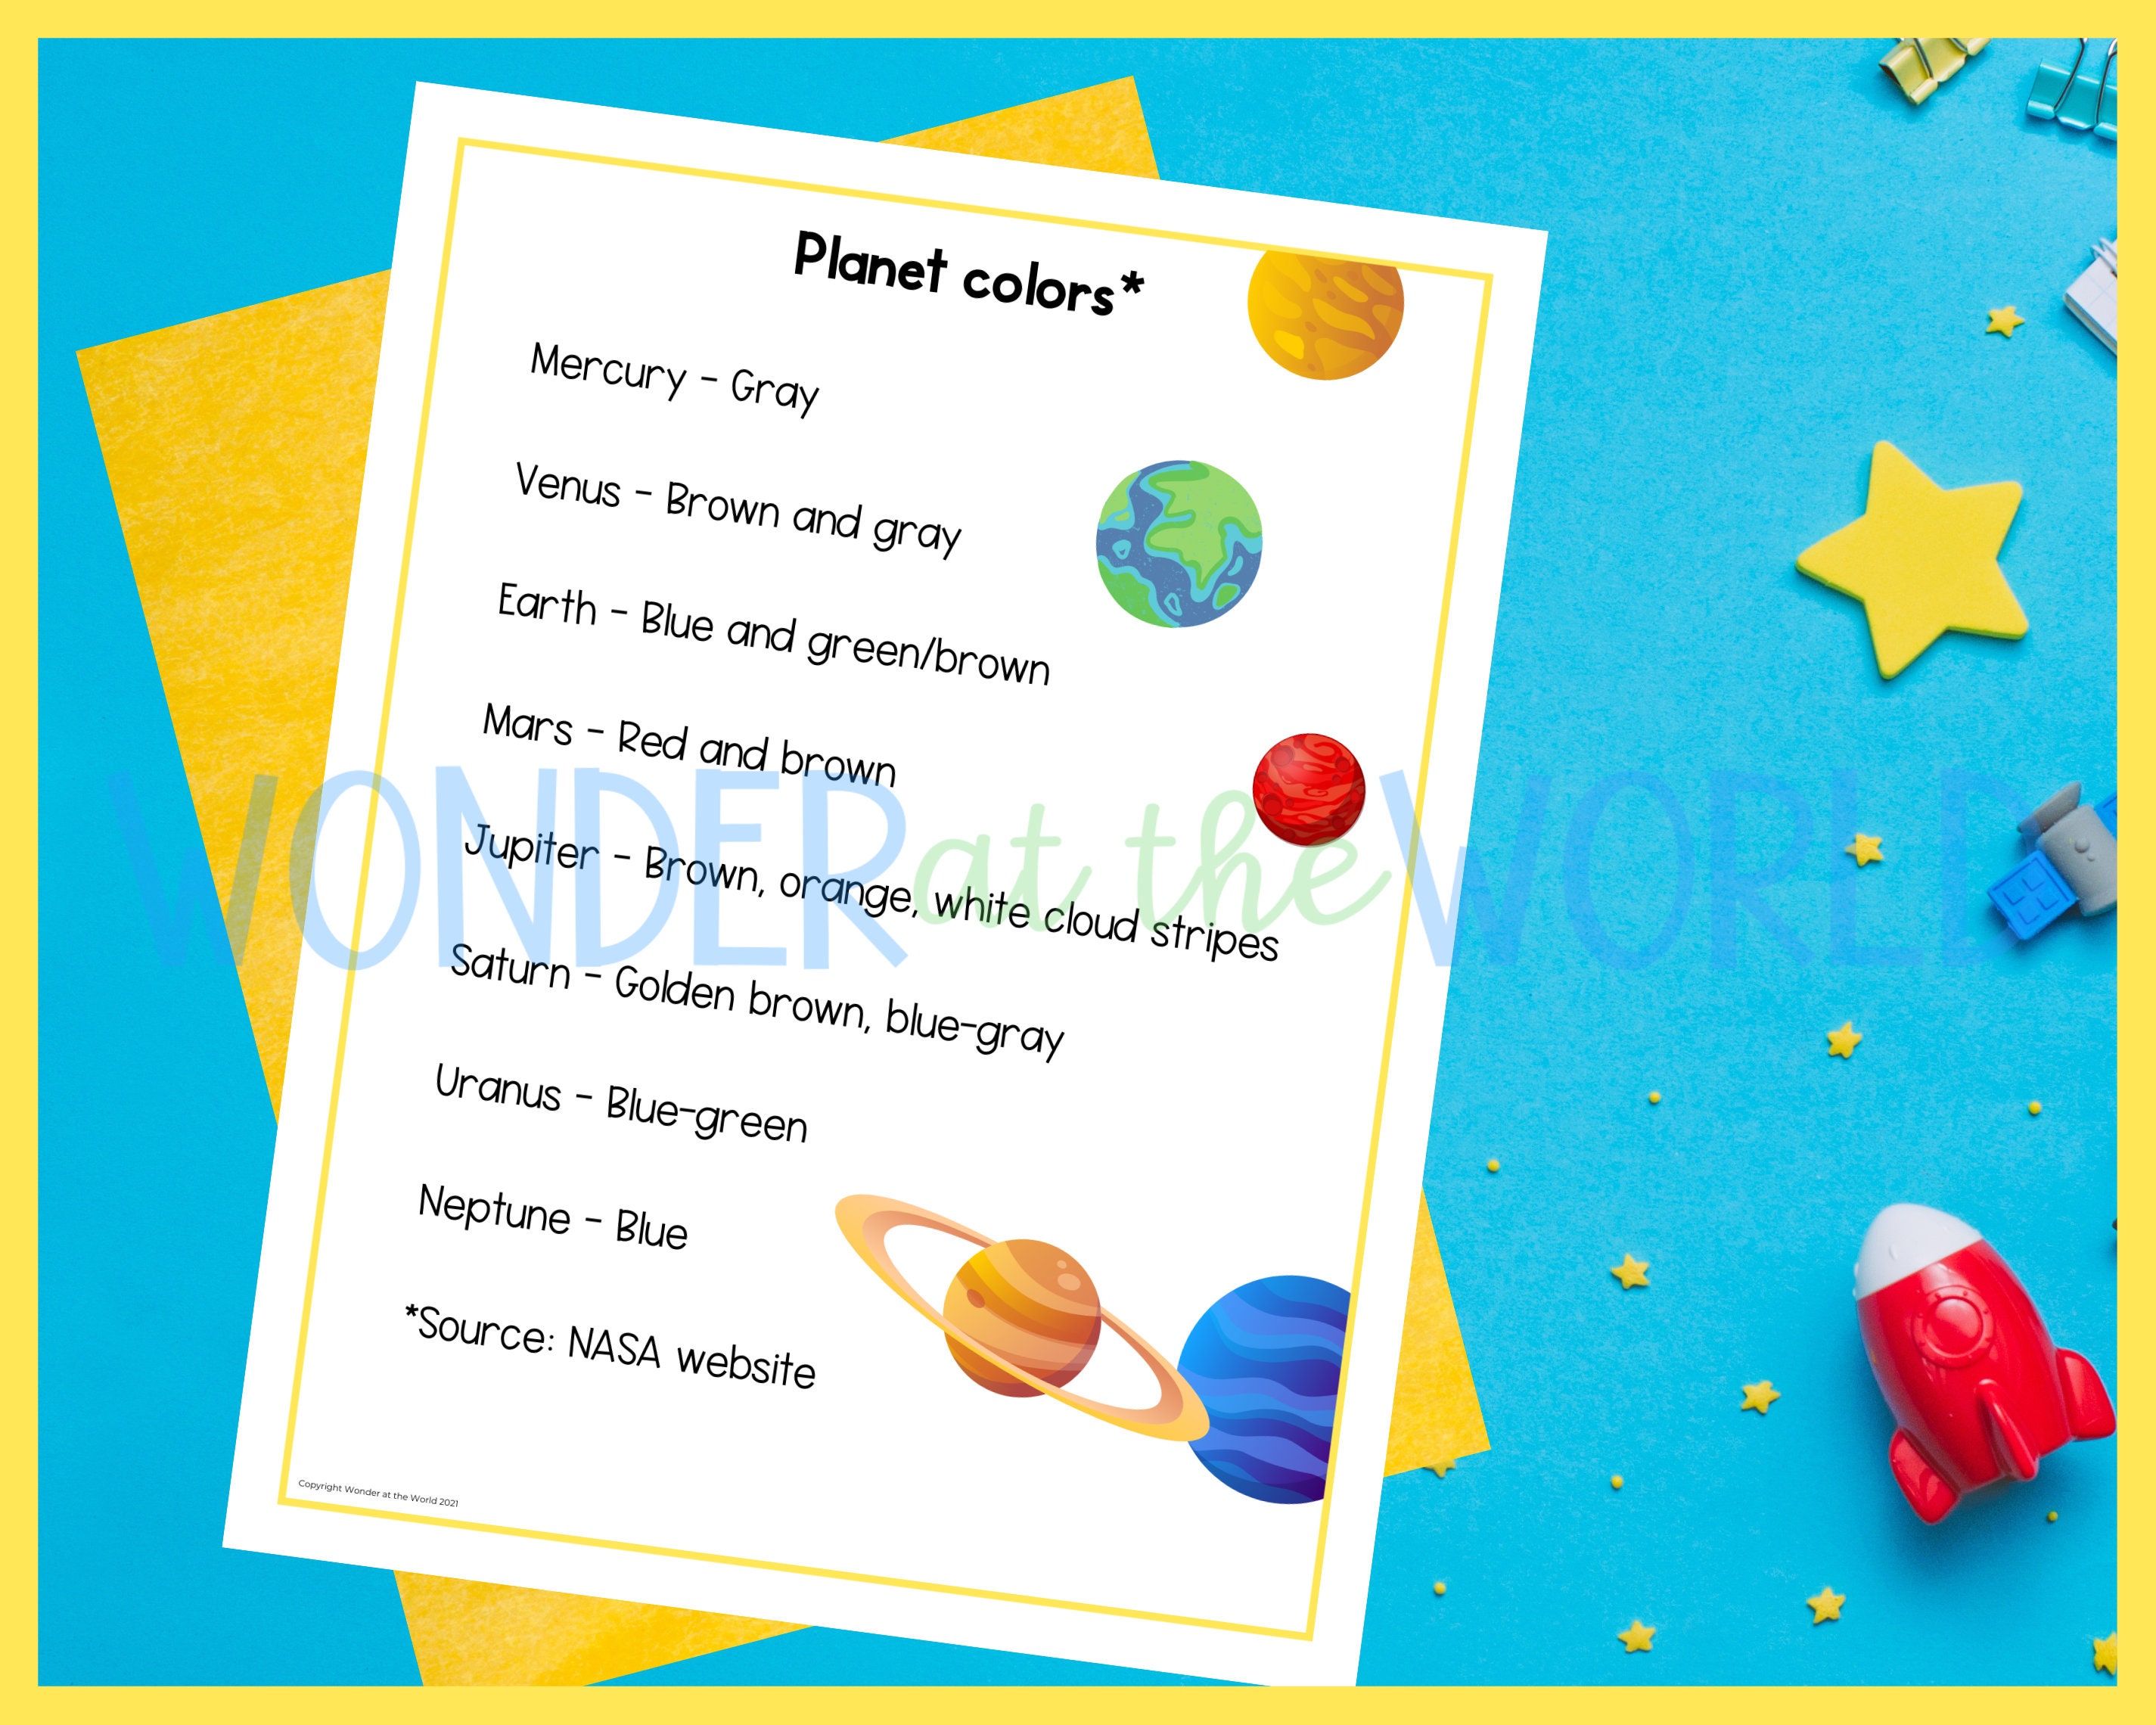 Solar system planets foldout kids' craft A4 and 11x8.5 - Etsy España